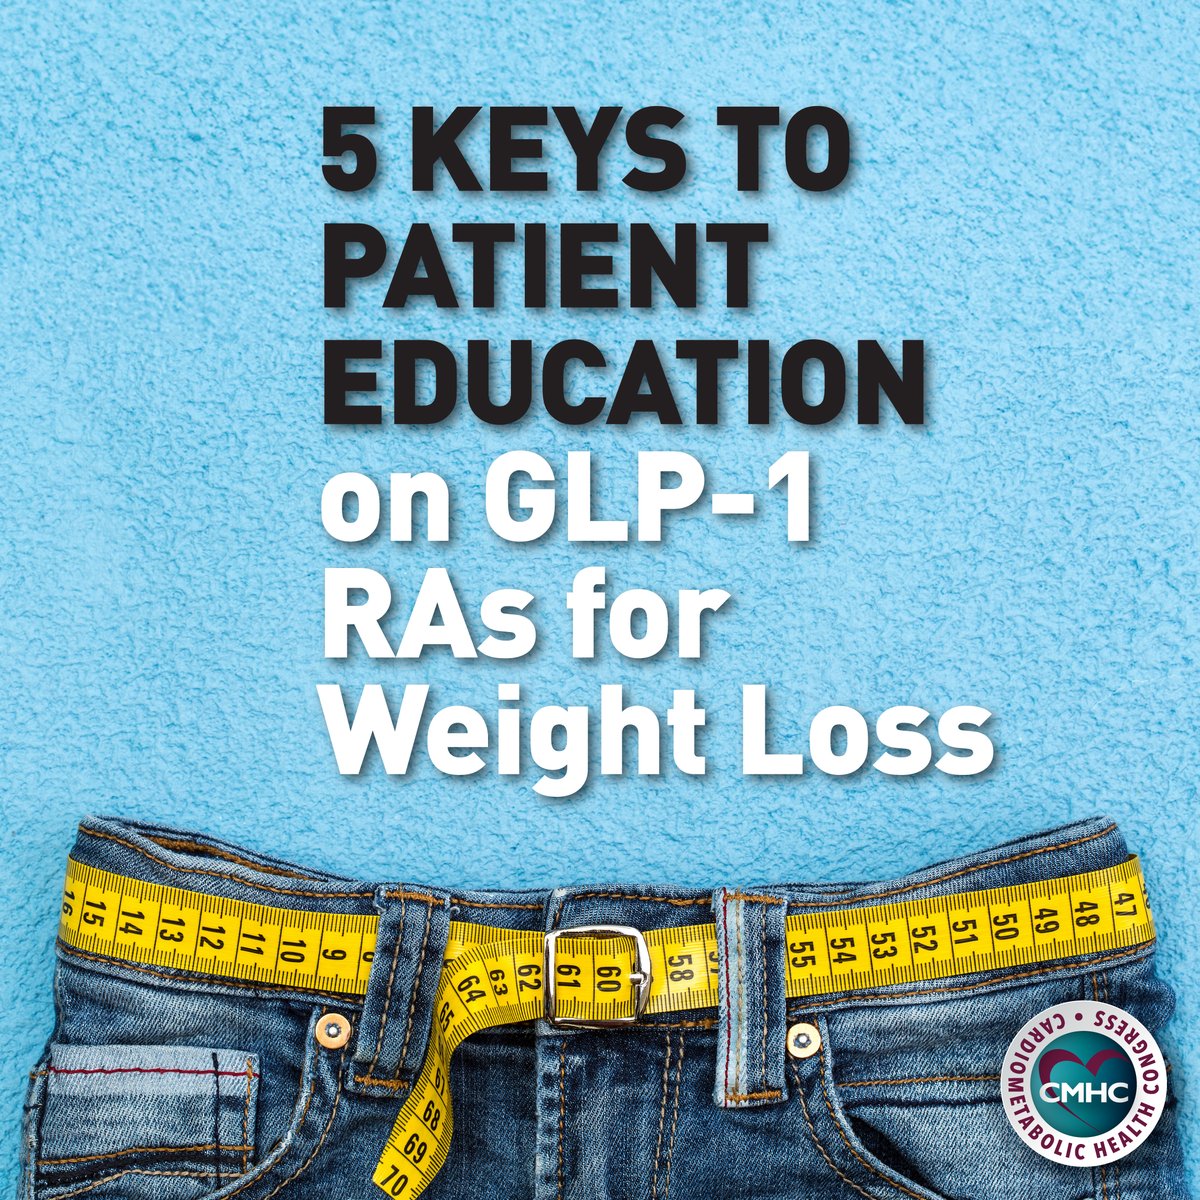 Amidst the buzz surrounding 'magic' weight loss drugs, curious patients are turning to you for guidance. As your trusted ally in cardiometabolic risk reduction, we've crafted a must-have guide to empower you in educating patients on accessing GLP-1 RAs 🔗cmhc.info/4alisuw